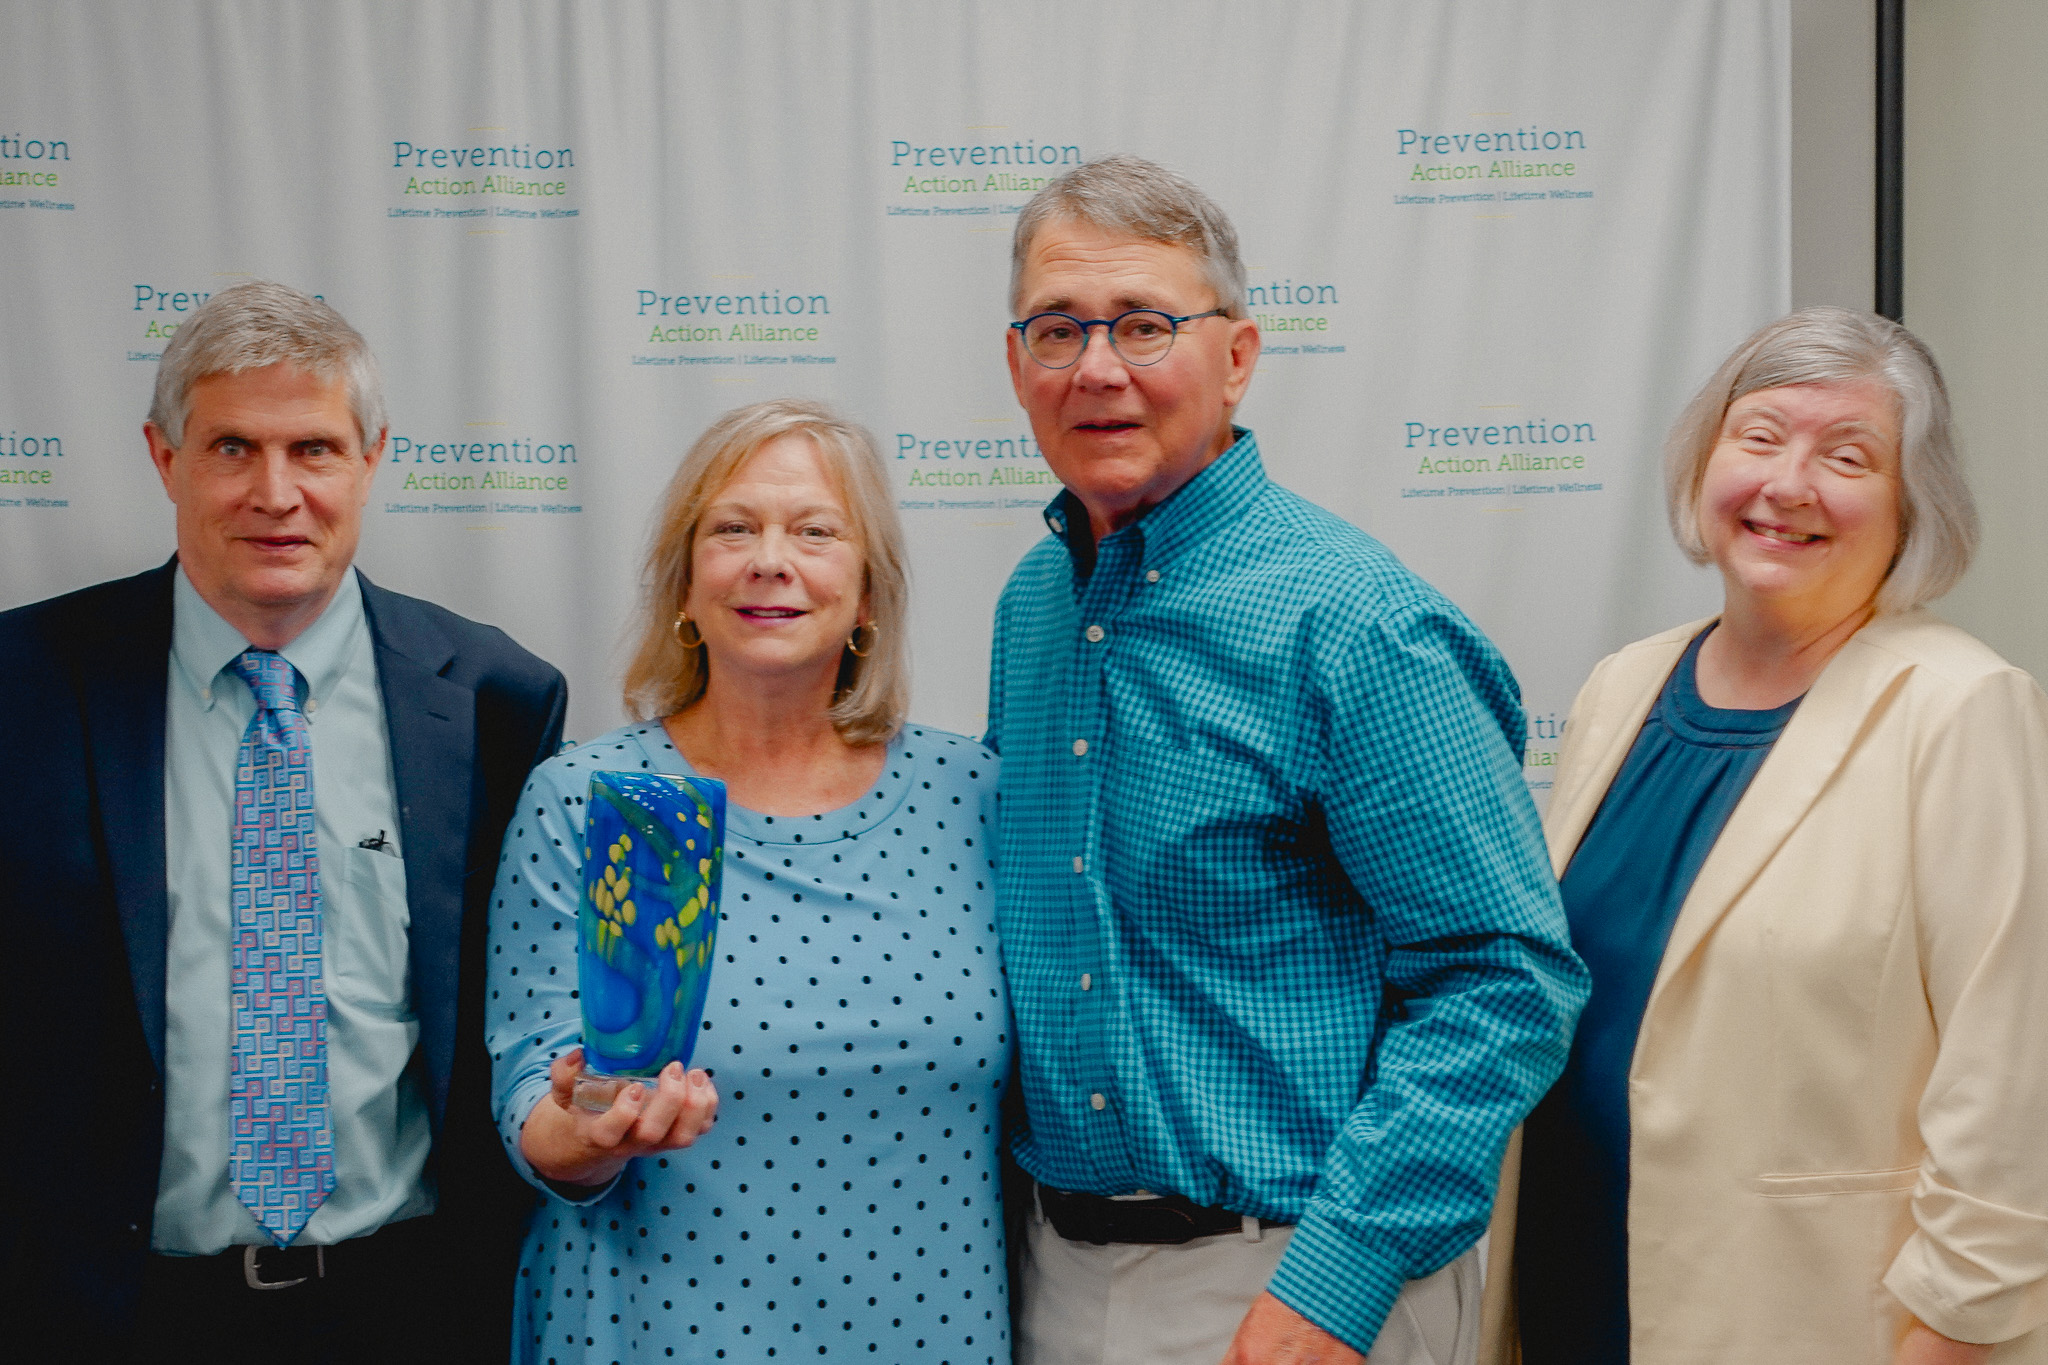 Paul and Ellen Schoonover presented with the Hope Taft Award for their prevention efforts in substance misuse.